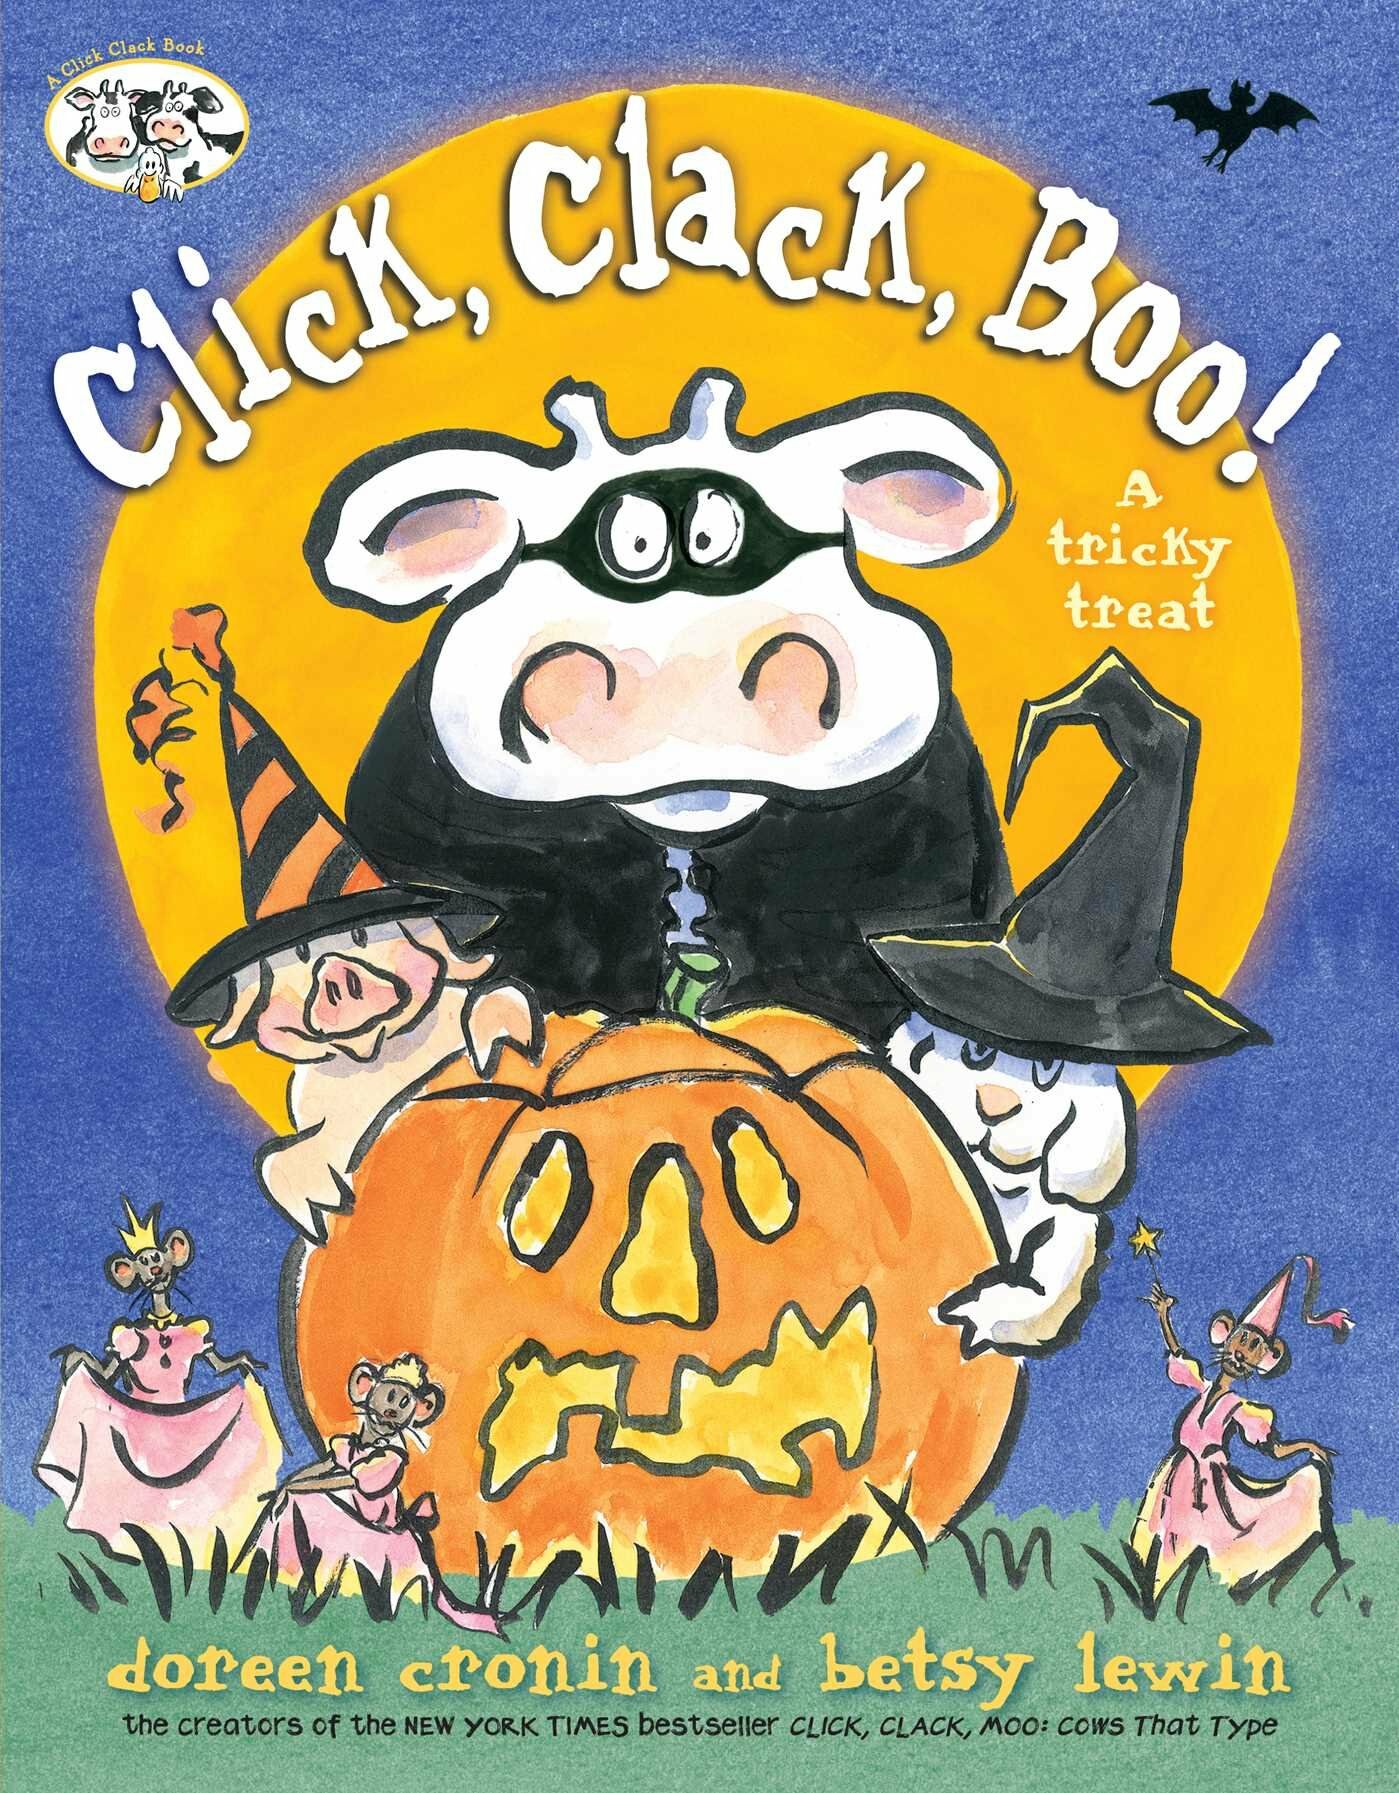 Click, Clack, Boo!: A Tricky Treat (Hardcover)